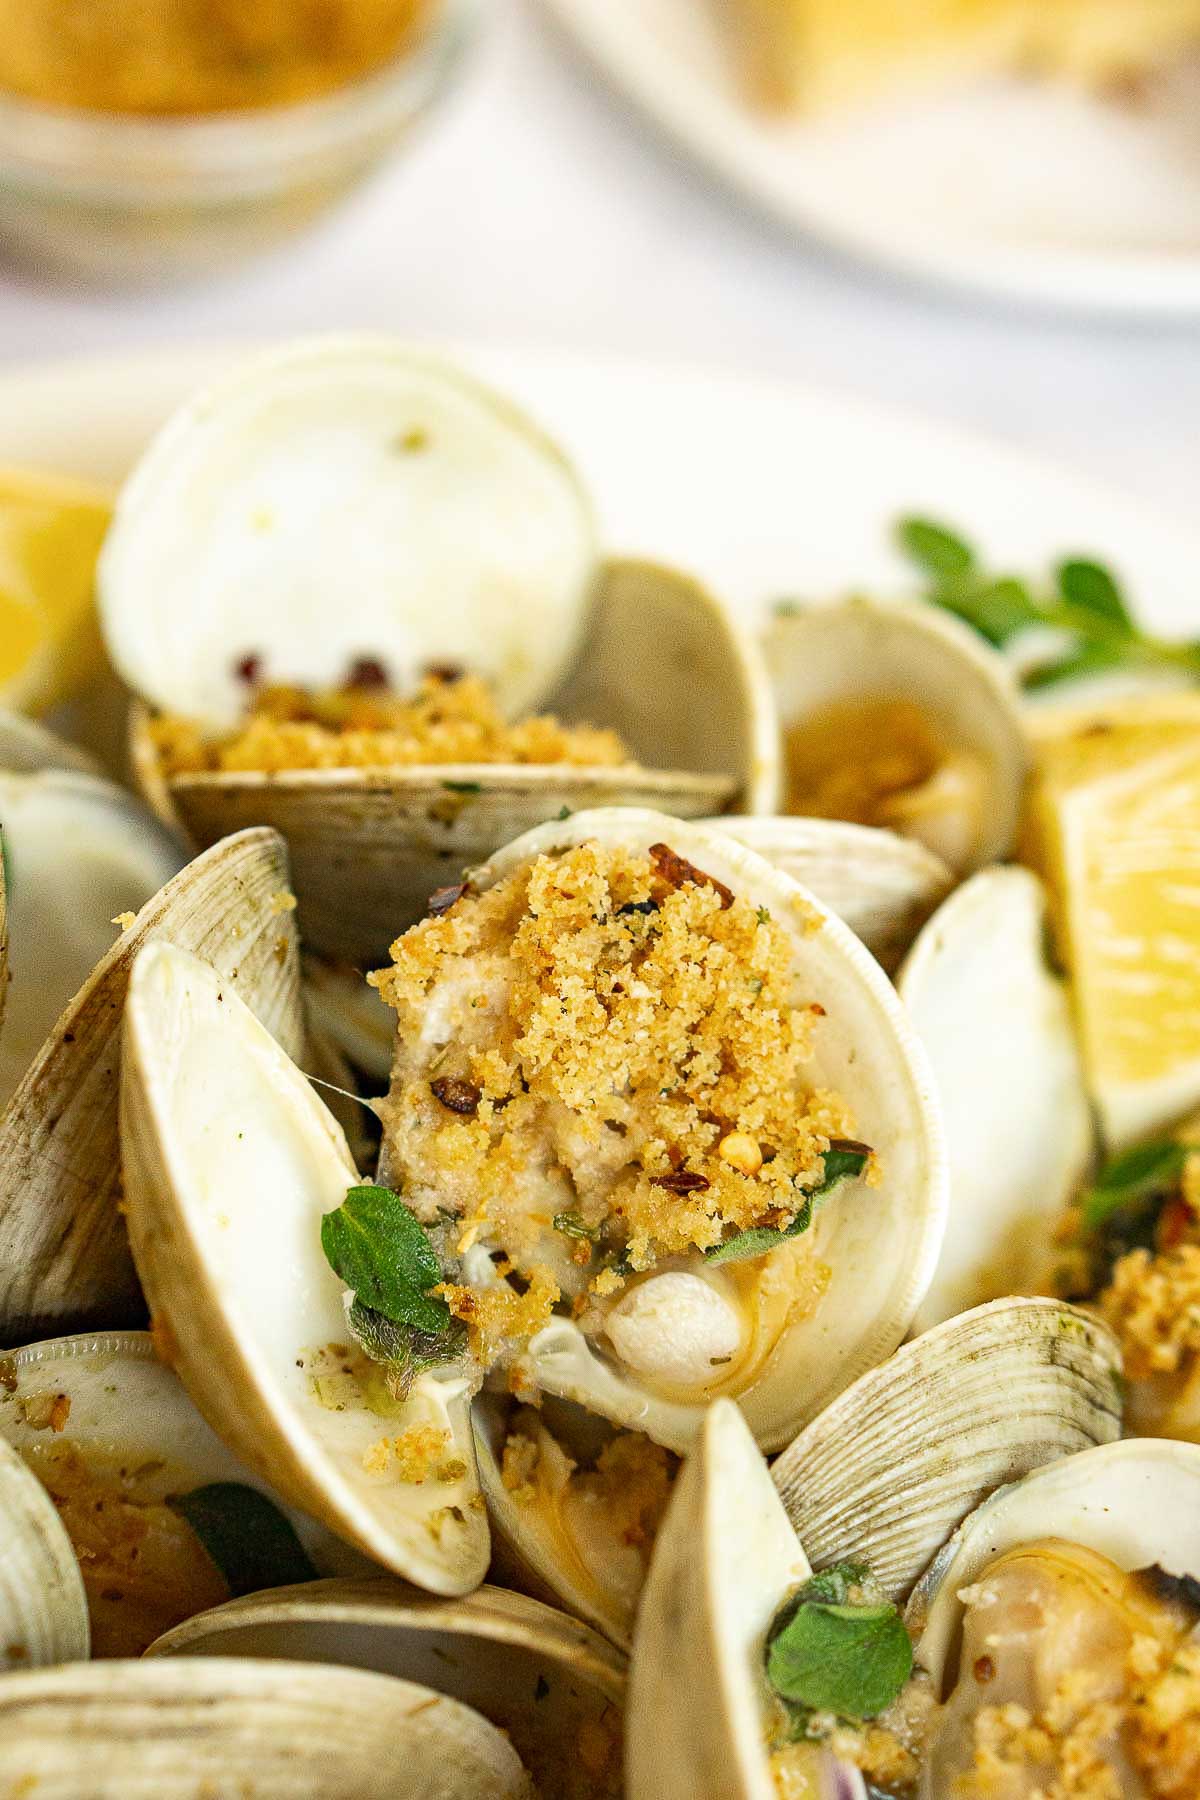 Littleneck clams with oregano breadcrumbs on top on a plate.